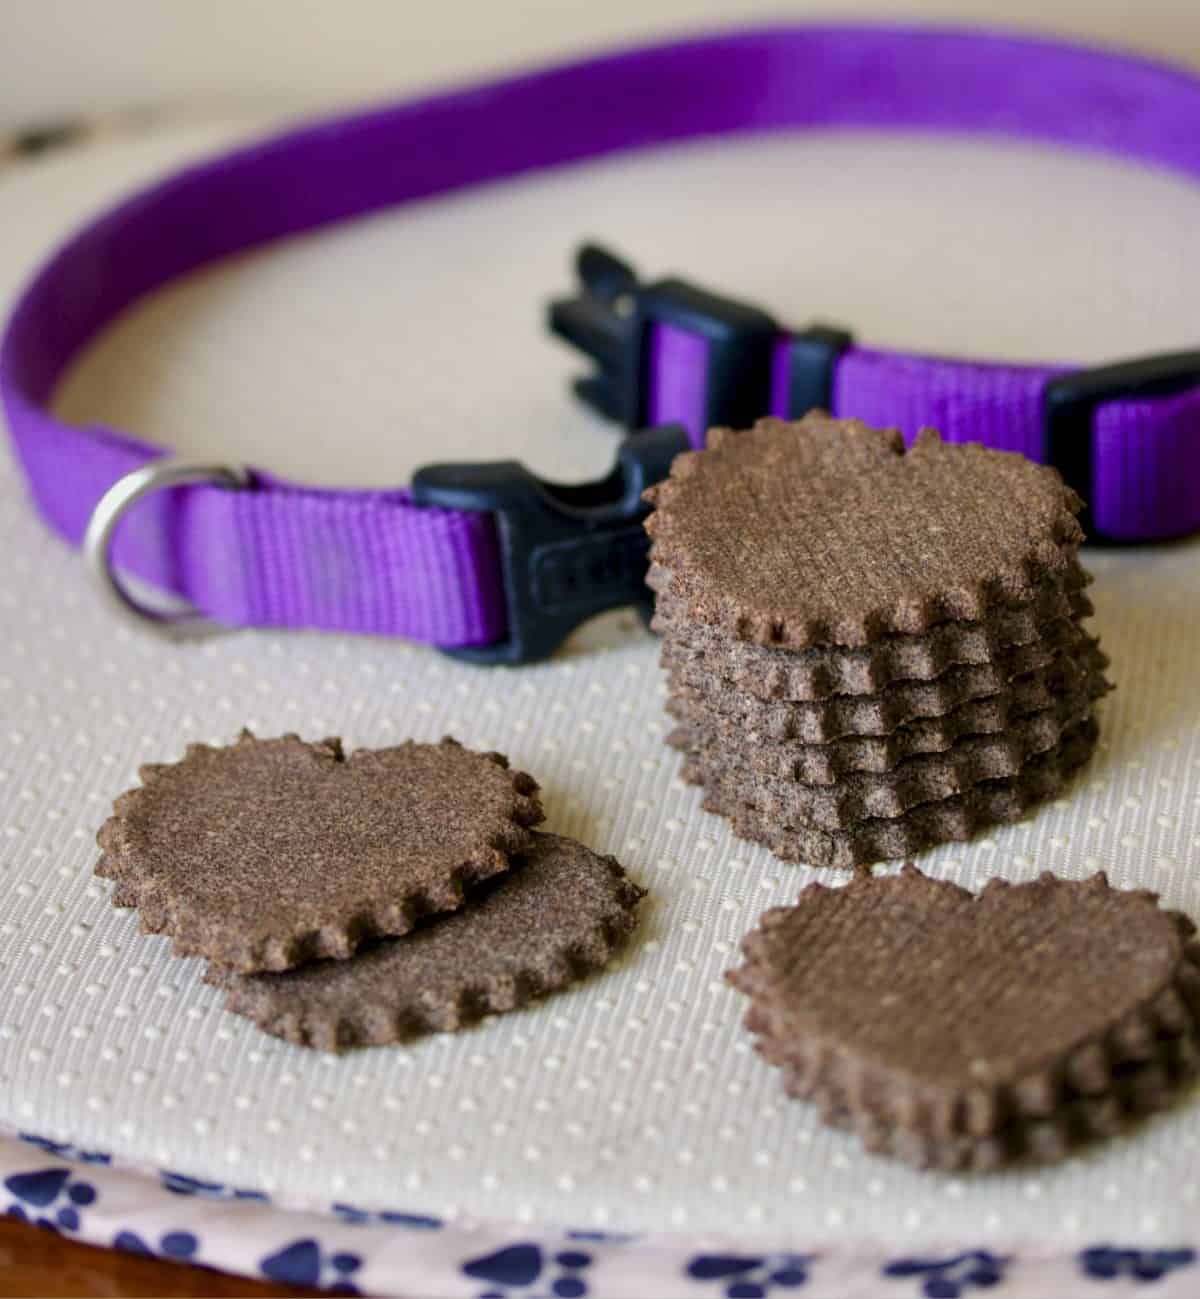 Dogg biscuits and purple dog collar.